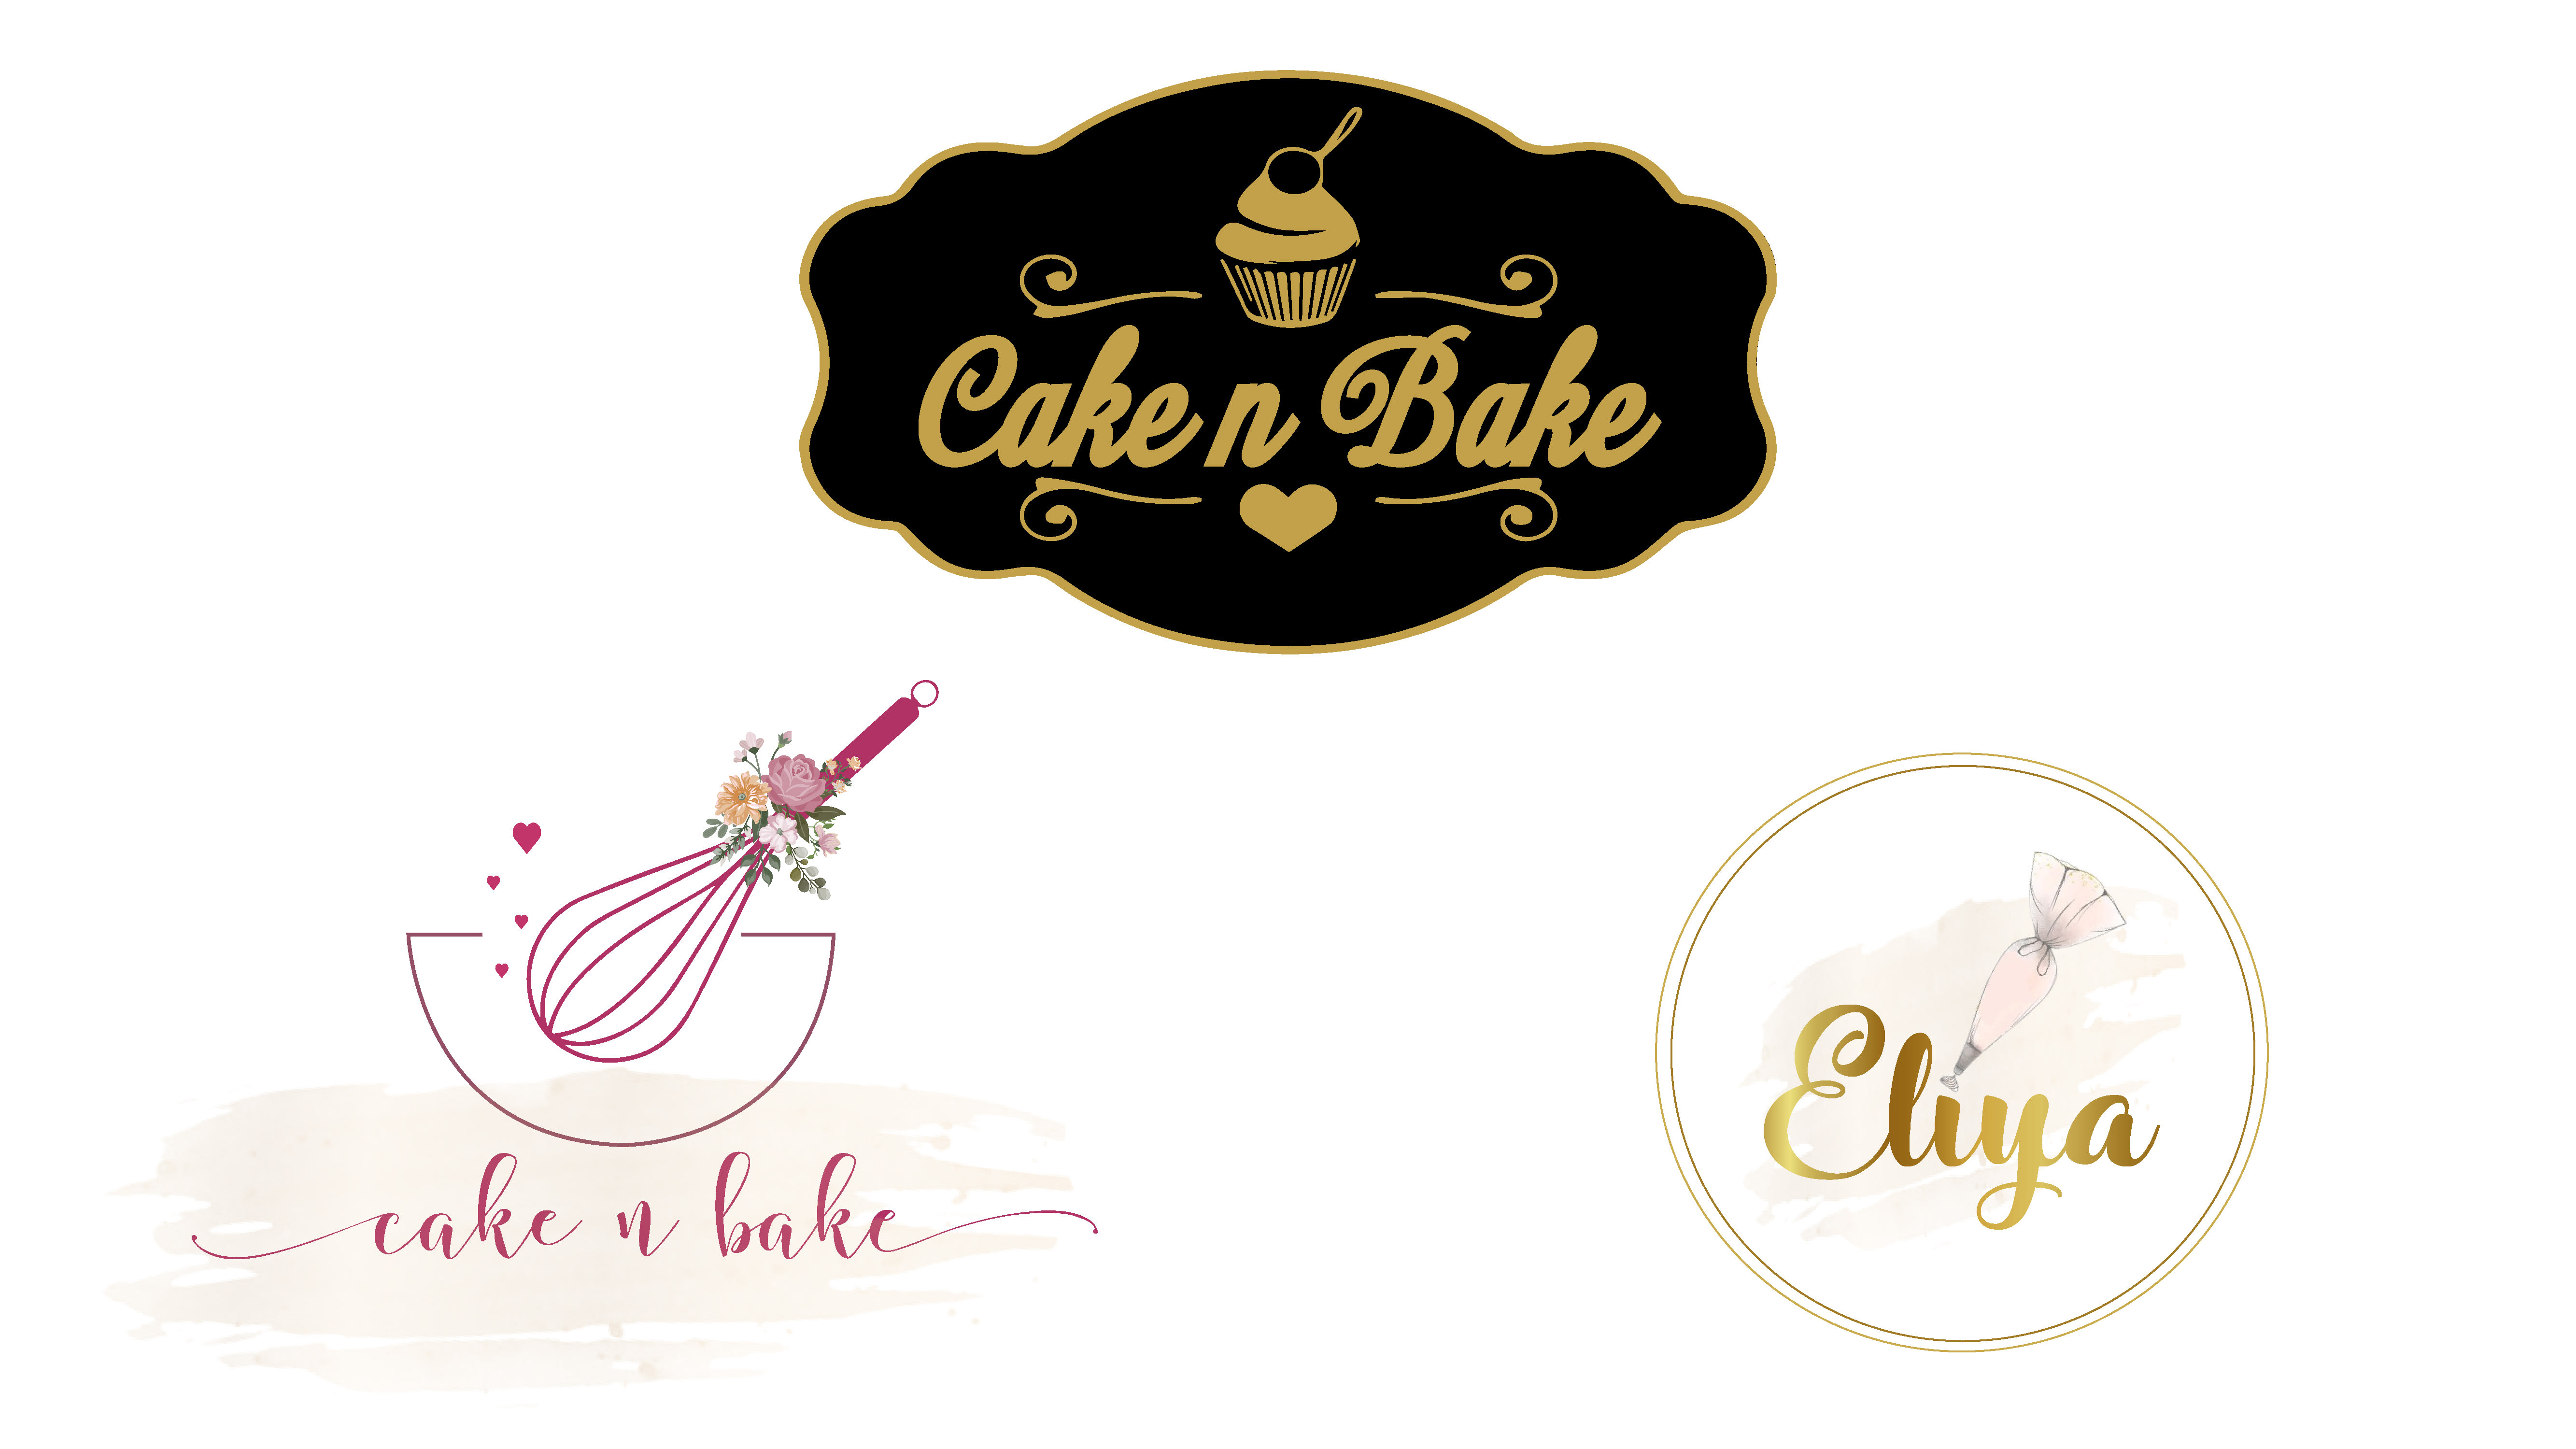 Top Bakeries In Gurgaon For Amazing Cakes | Best Cake Shop in Gurgaon